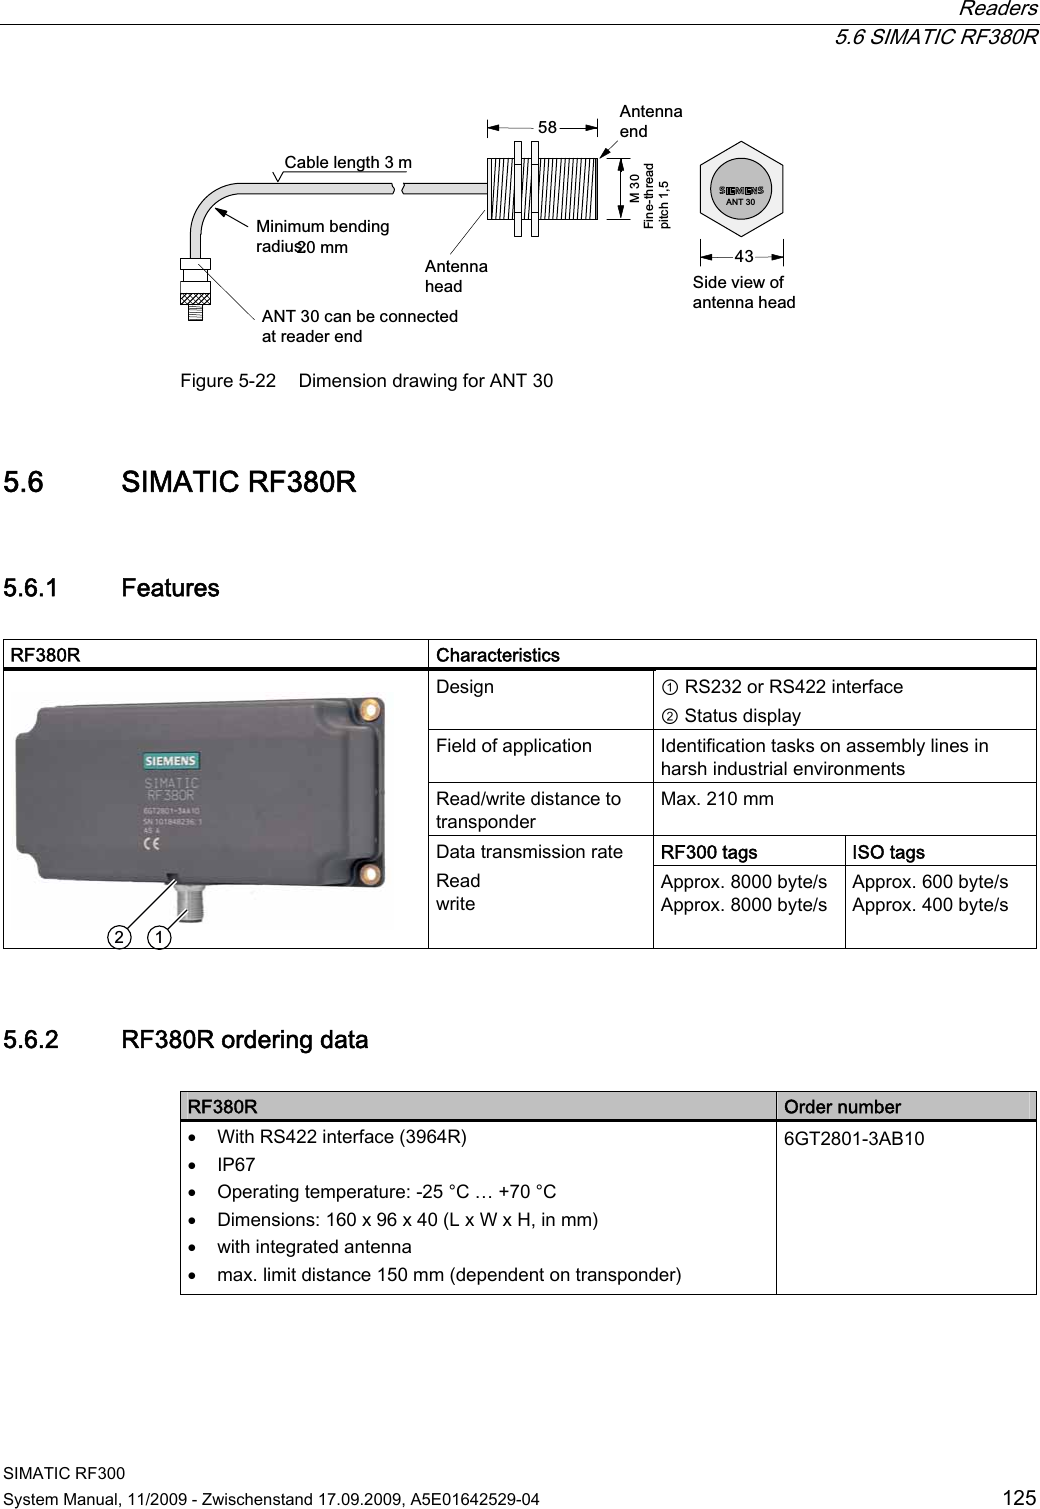  Readers  5.6 SIMATIC RF380R SIMATIC RF300 System Manual, 11/2009 - Zwischenstand 17.09.2009, A5E01642529-04  125 &amp;DEOHOHQJWKP0LQLPXPEHQGLQJUDGLXV$17FDQEHFRQQHFWHGDWUHDGHUHQG$QWHQQDKHDG 6LGHYLHZRIDQWHQQDKHDG$QWHQQDHQG)LQHWKUHDGSLWFKPP $170 Figure 5-22  Dimension drawing for ANT 30 5.6 SIMATIC RF380R 5.6.1 Features  RF380R   Characteristics Design  ① RS232 or RS422 interface ② Status display Field of application  Identification tasks on assembly lines in harsh industrial environments Read/write distance to transponder Max. 210 mm RF300 tags ISO tags   Data transmission rate Read write Approx. 8000 byte/s Approx. 8000 byte/s Approx. 600 byte/s Approx. 400 byte/s 5.6.2 RF380R ordering data  RF380R  Order number  With RS422 interface (3964R)  IP67  Operating temperature: -25 °C … +70 °C  Dimensions: 160 x 96 x 40 (L x W x H, in mm)  with integrated antenna  max. limit distance 150 mm (dependent on transponder) 6GT2801-3AB10 